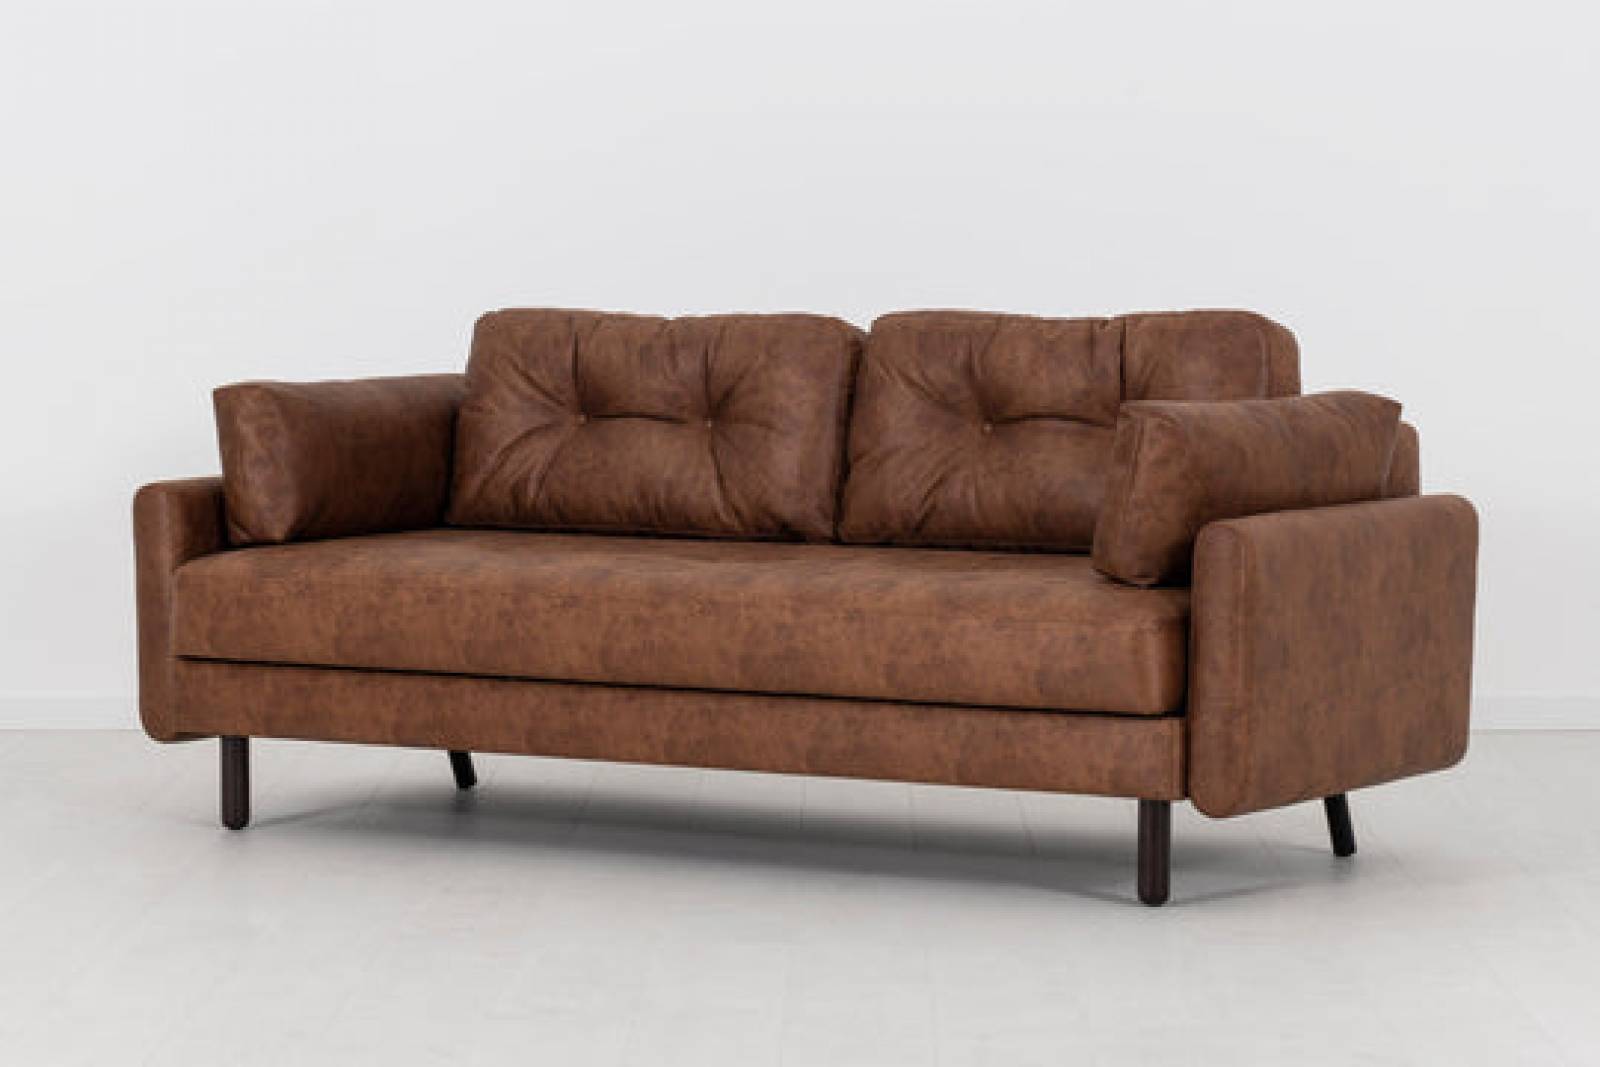 Swyft Model 04 - 3 Seater Sofa Bed - Faux Leather Chestnut thumbnails